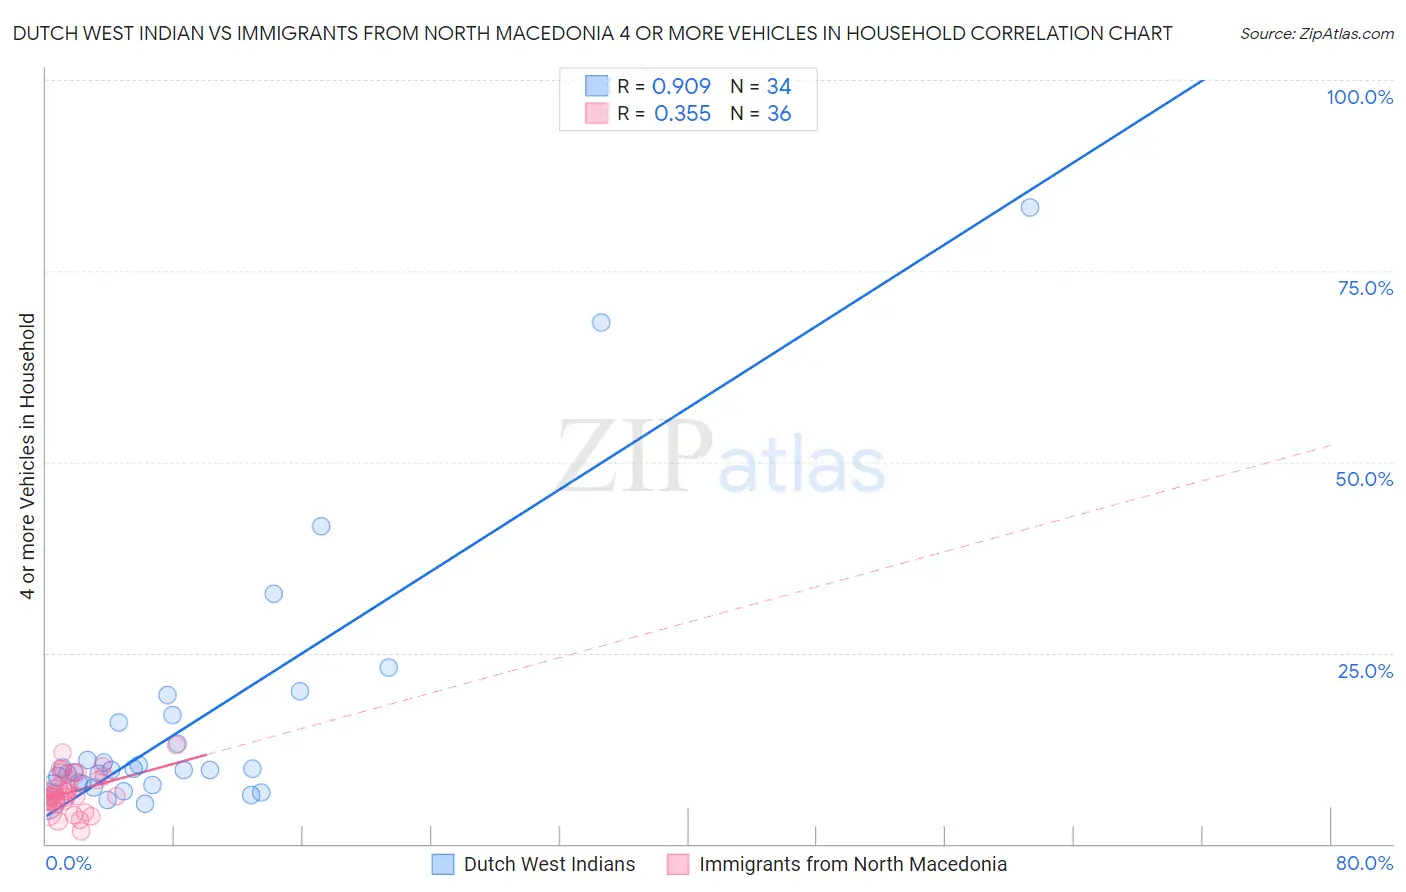 Dutch West Indian vs Immigrants from North Macedonia 4 or more Vehicles in Household